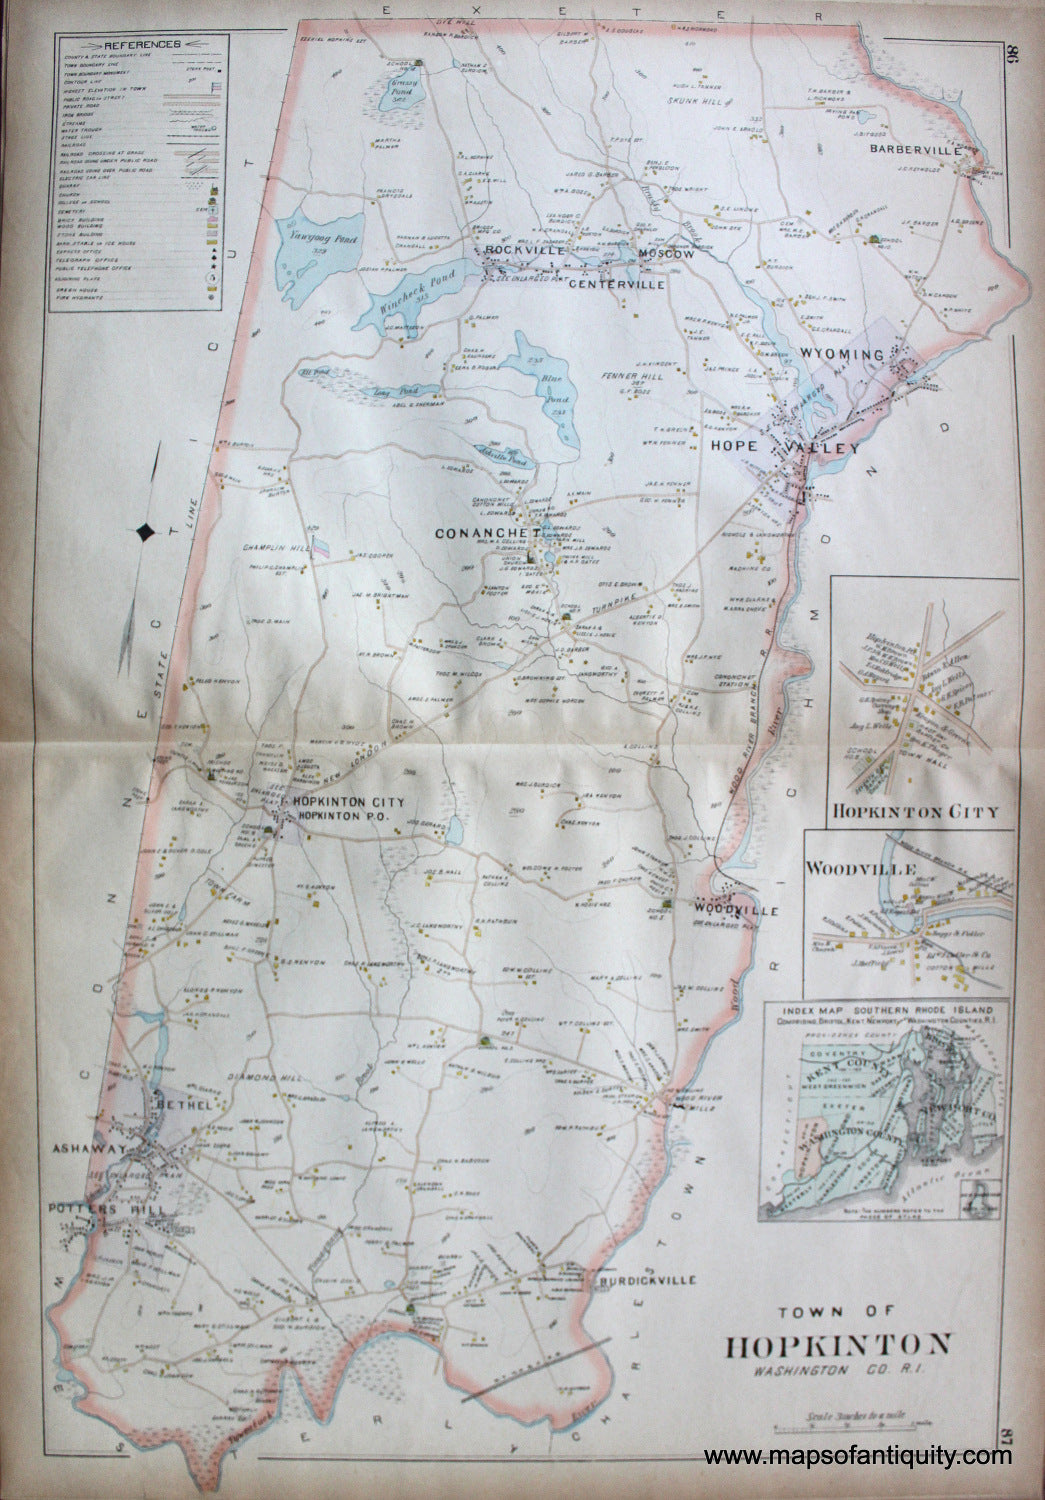 Antique-Hand-Colored-Map-Town-of-Hopkinton-Hopkinton-City-Village-of-Woodville-United-States-Northeast-1895-Everts-&-Richards-Maps-Of-Antiquity